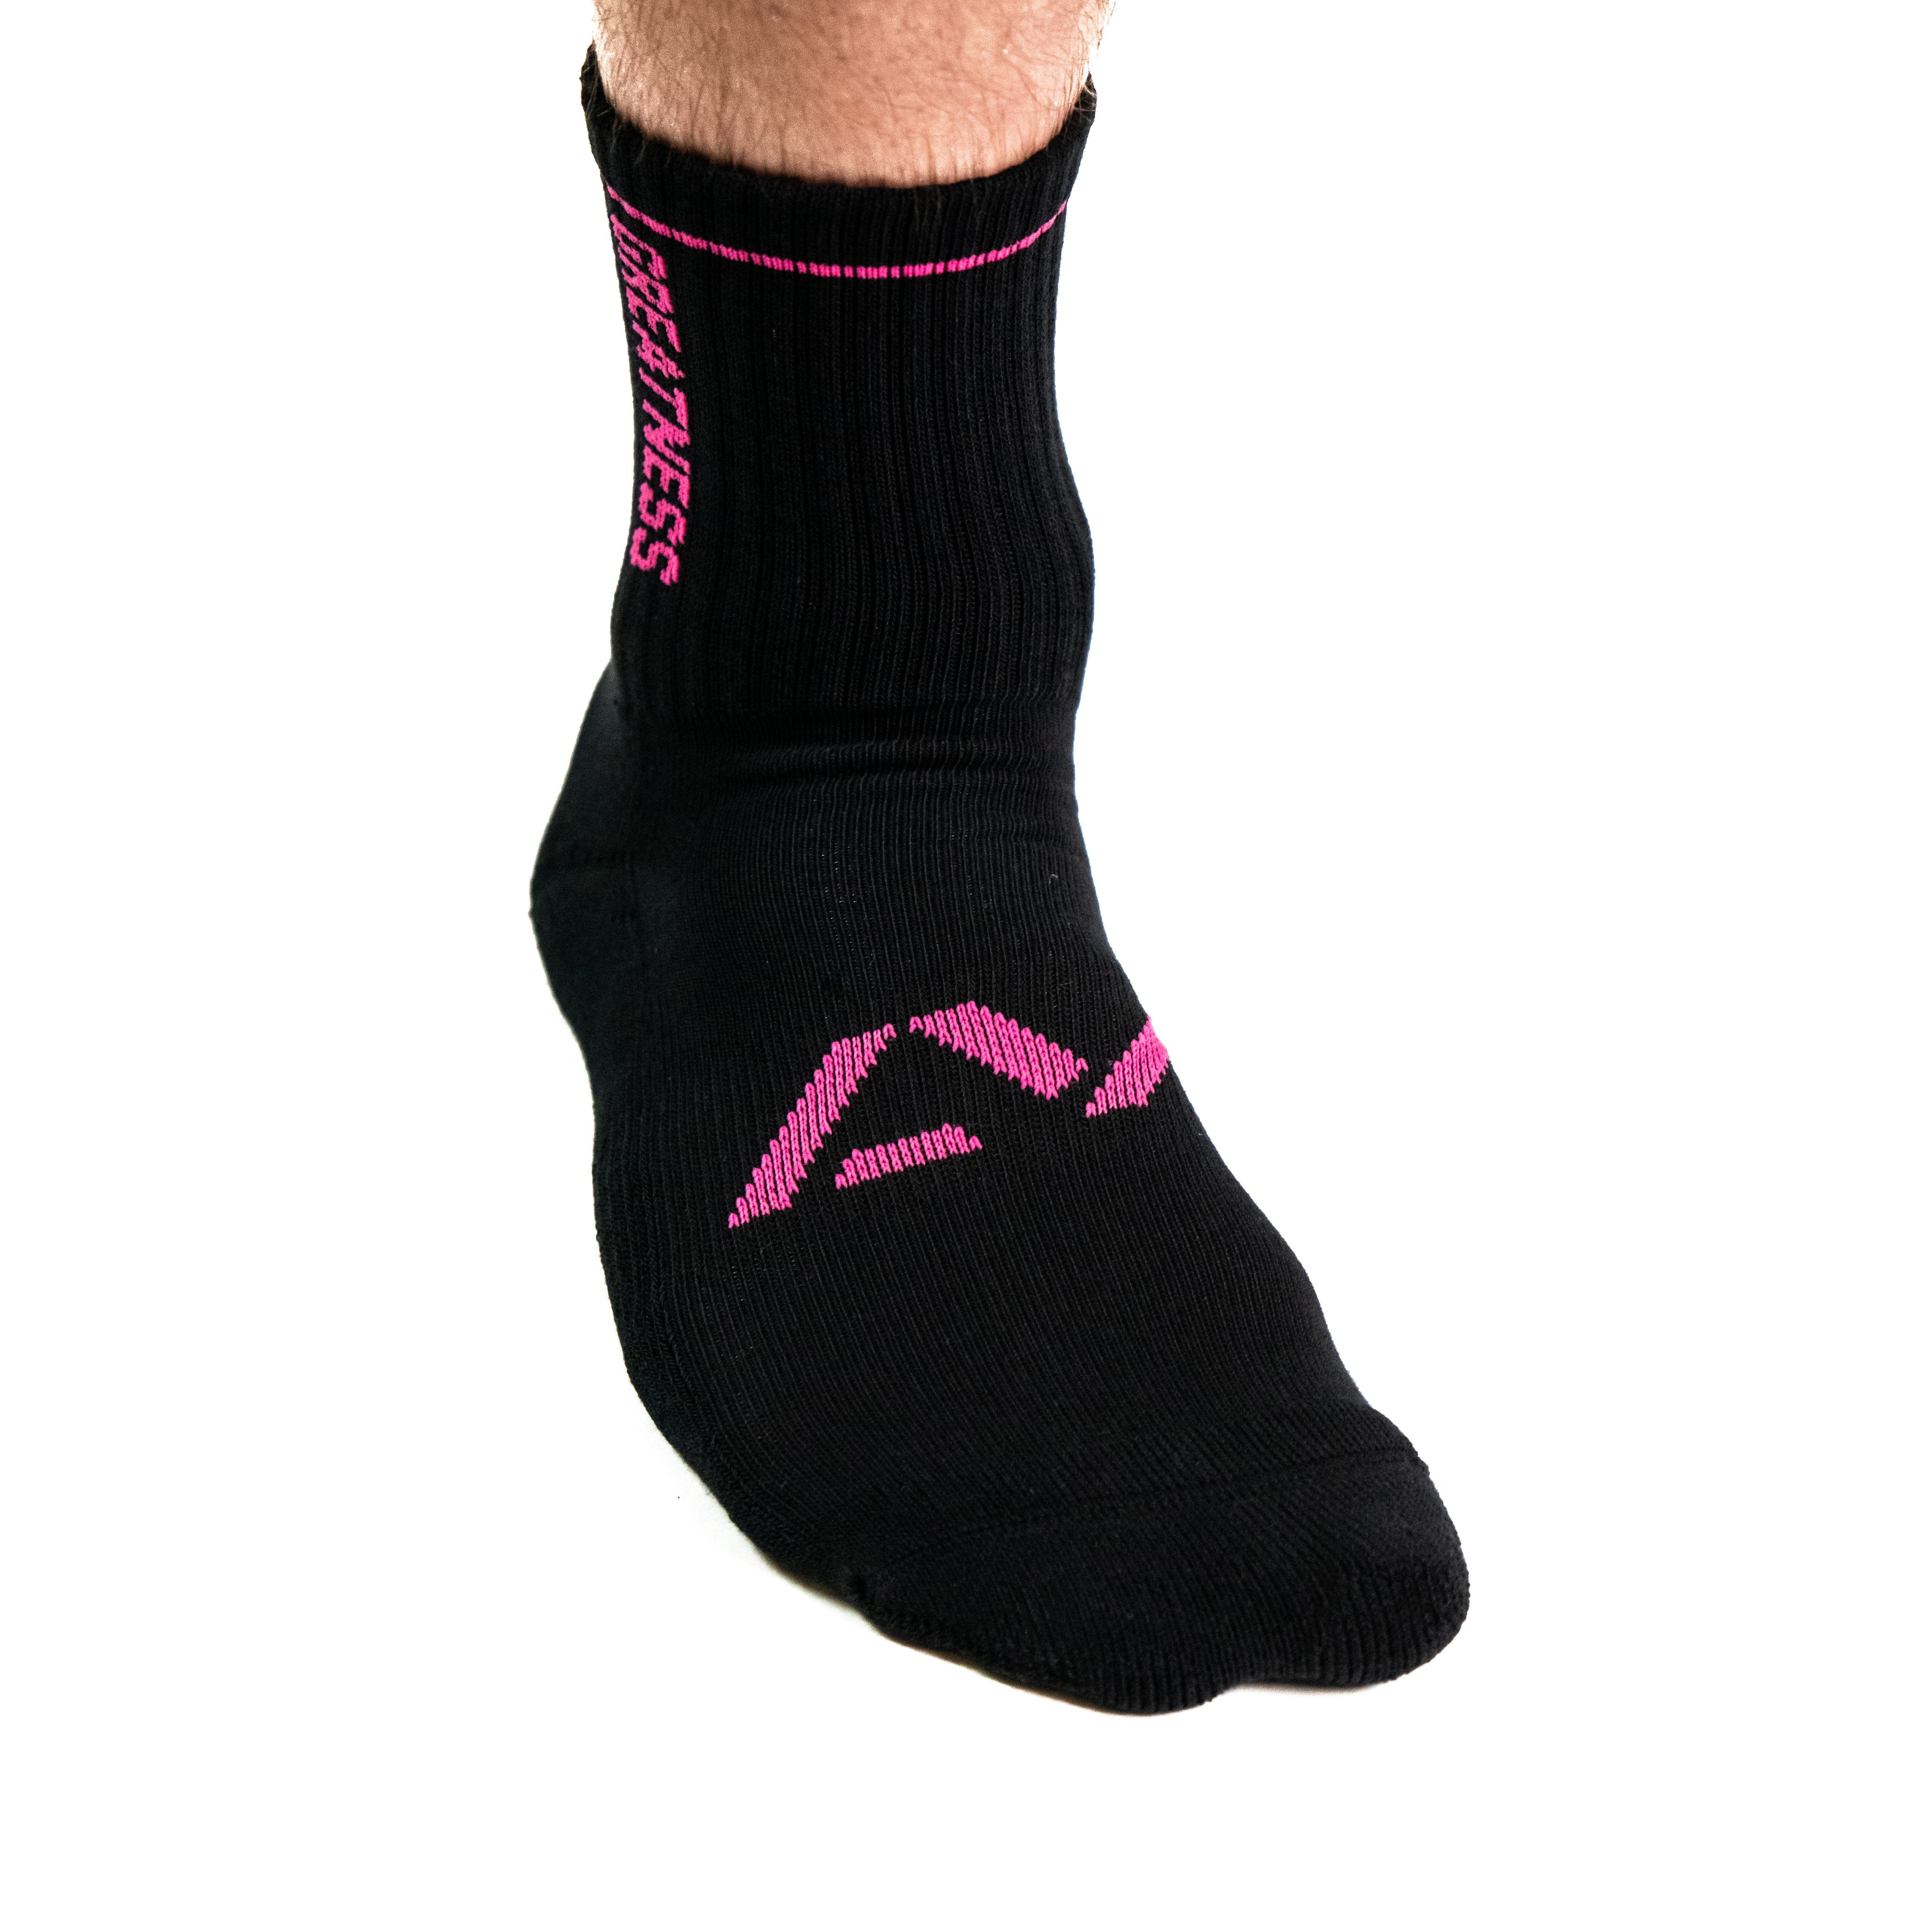 Standout from the crowd in our Pink Crew socks and let your energy show on the platform, in your training or while out and about. 